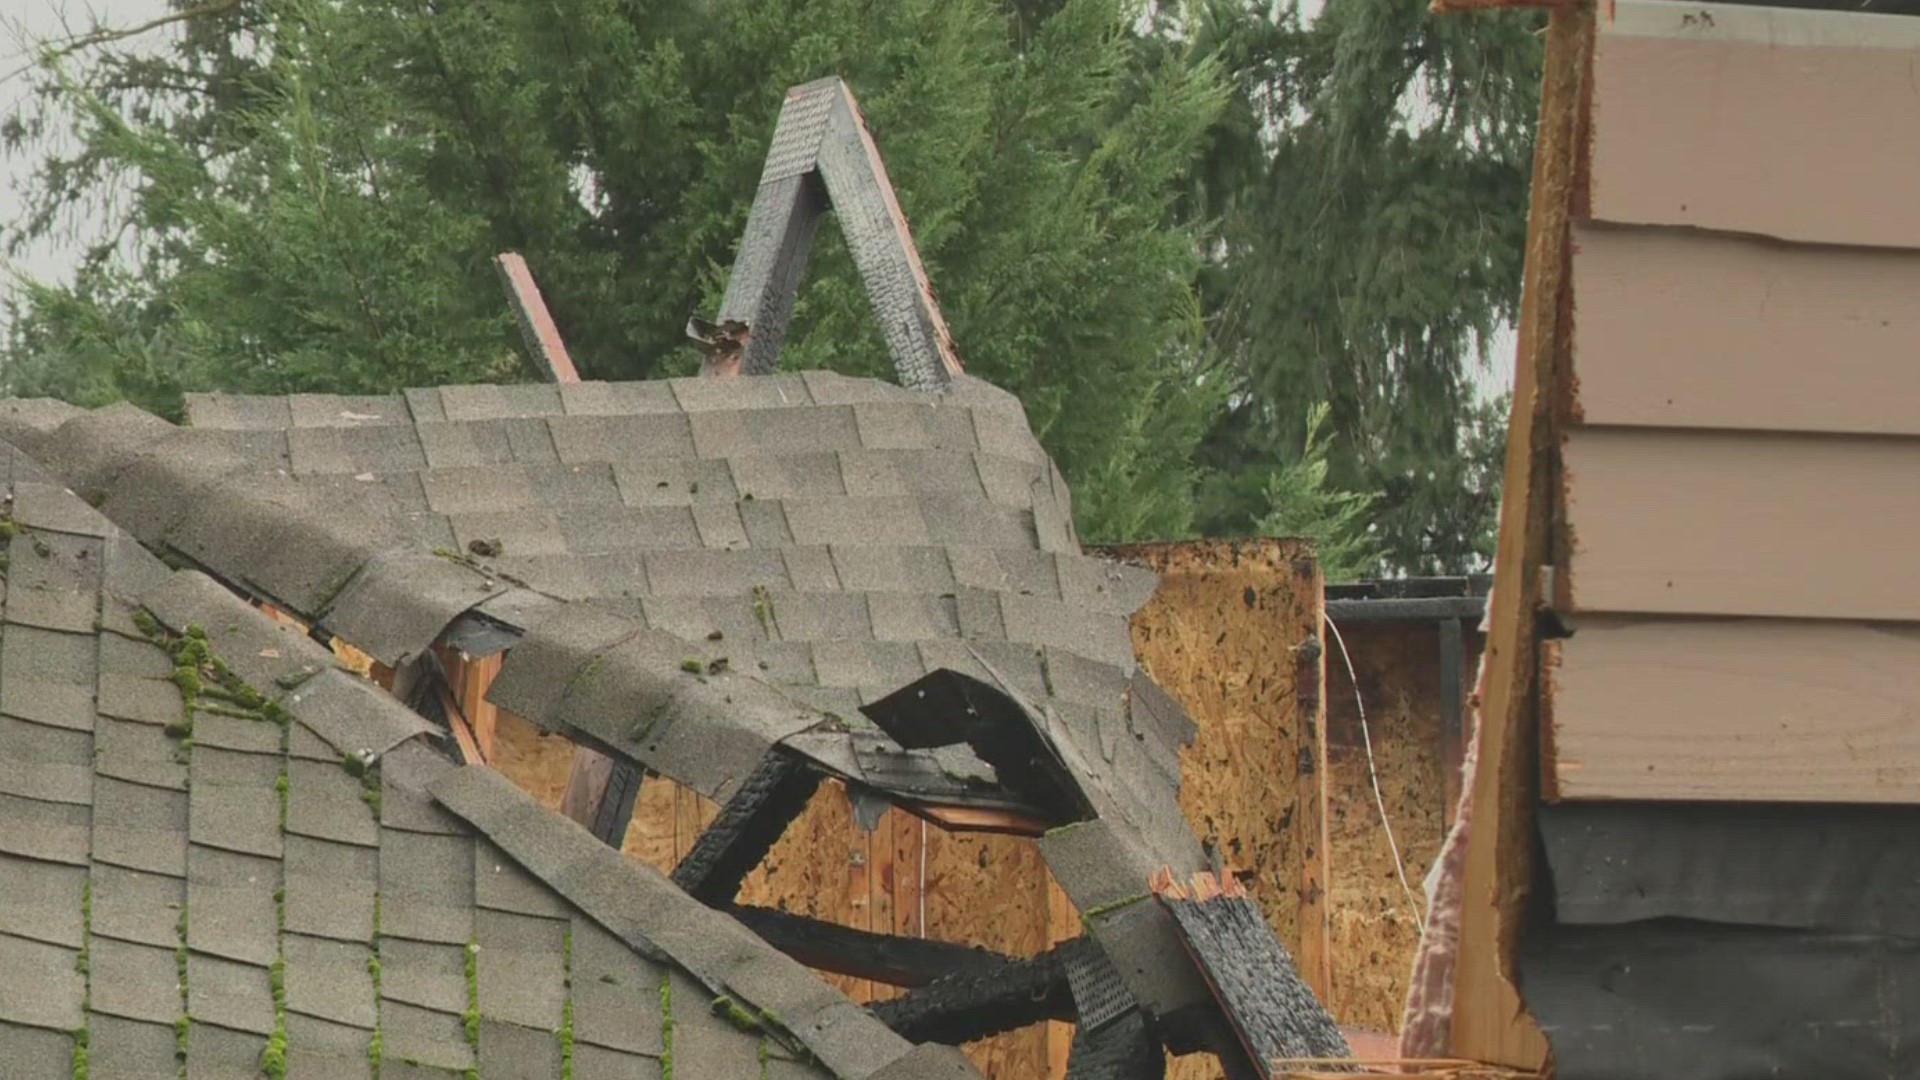 The roof of Evergreen Memorial Gardens partially collapsed, and police are investigating the cause of the fire.